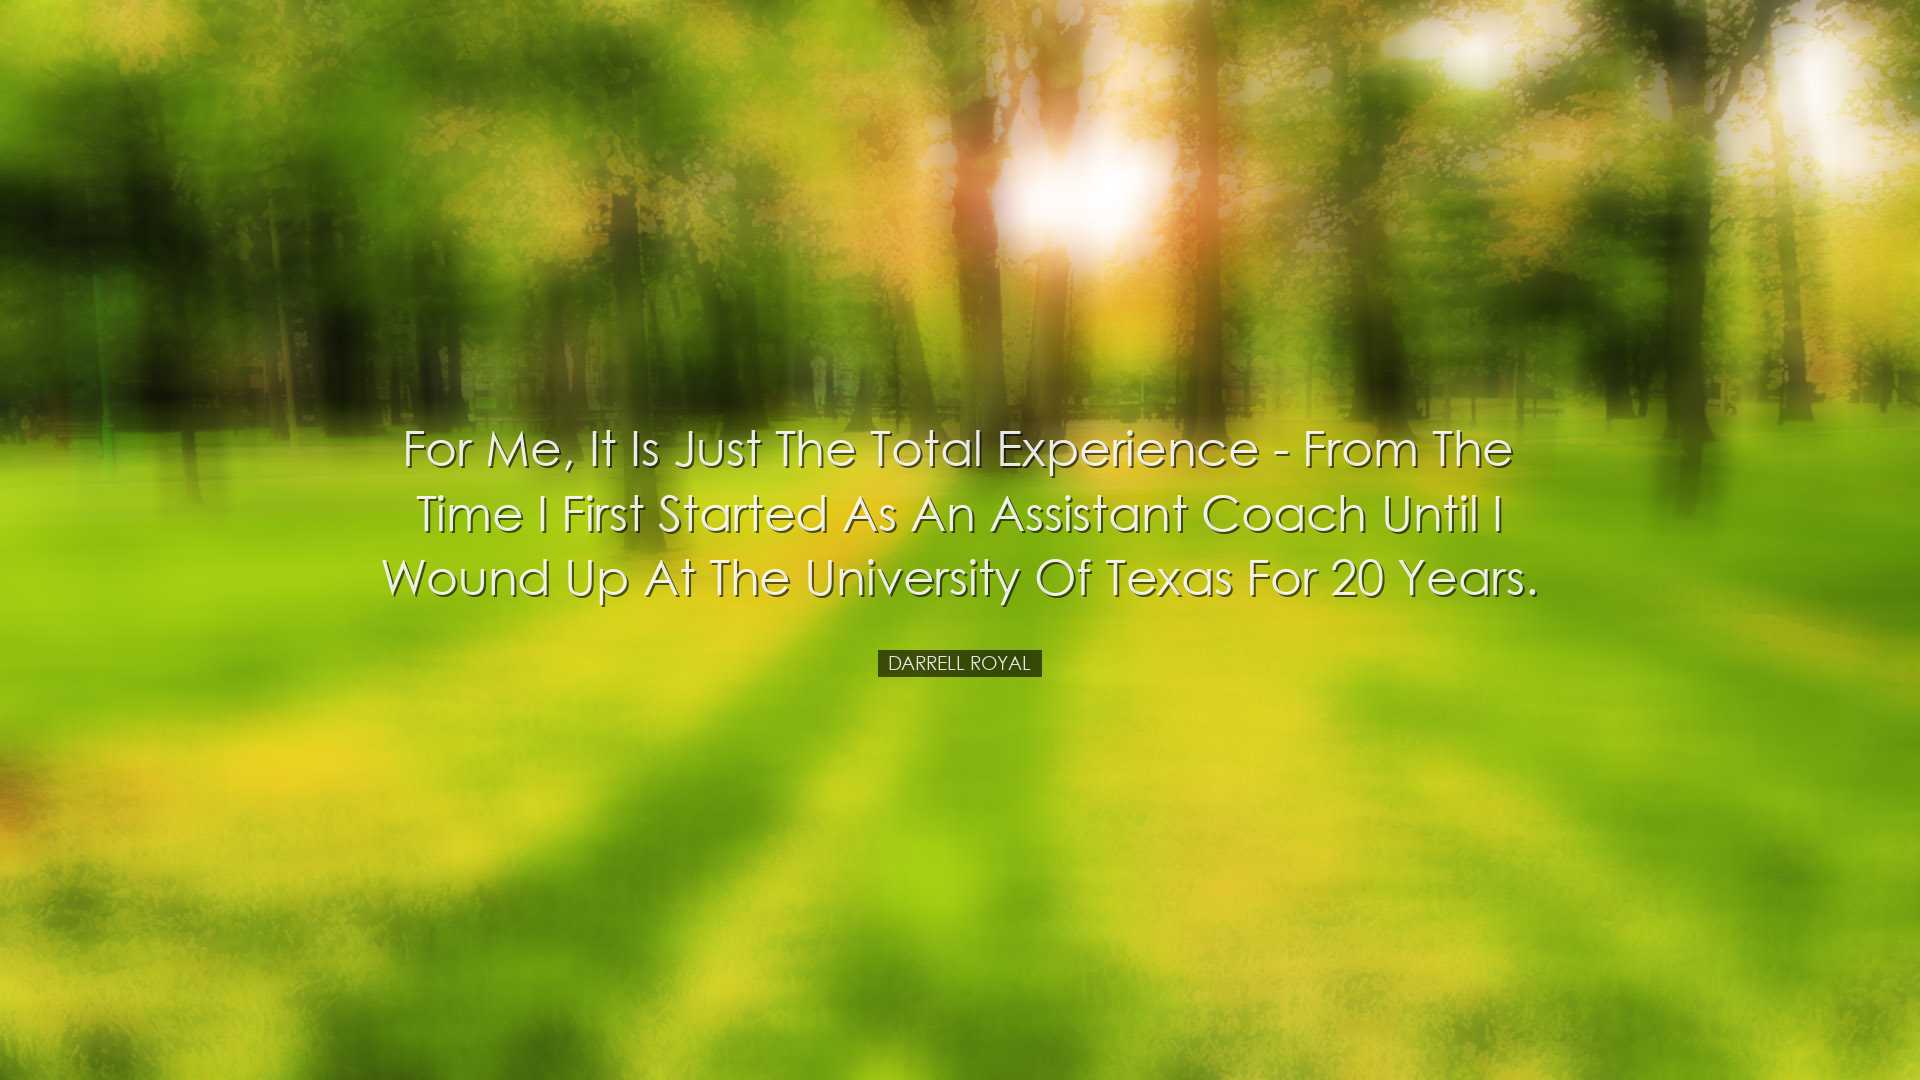 For me, it is just the total experience - from the time I first st